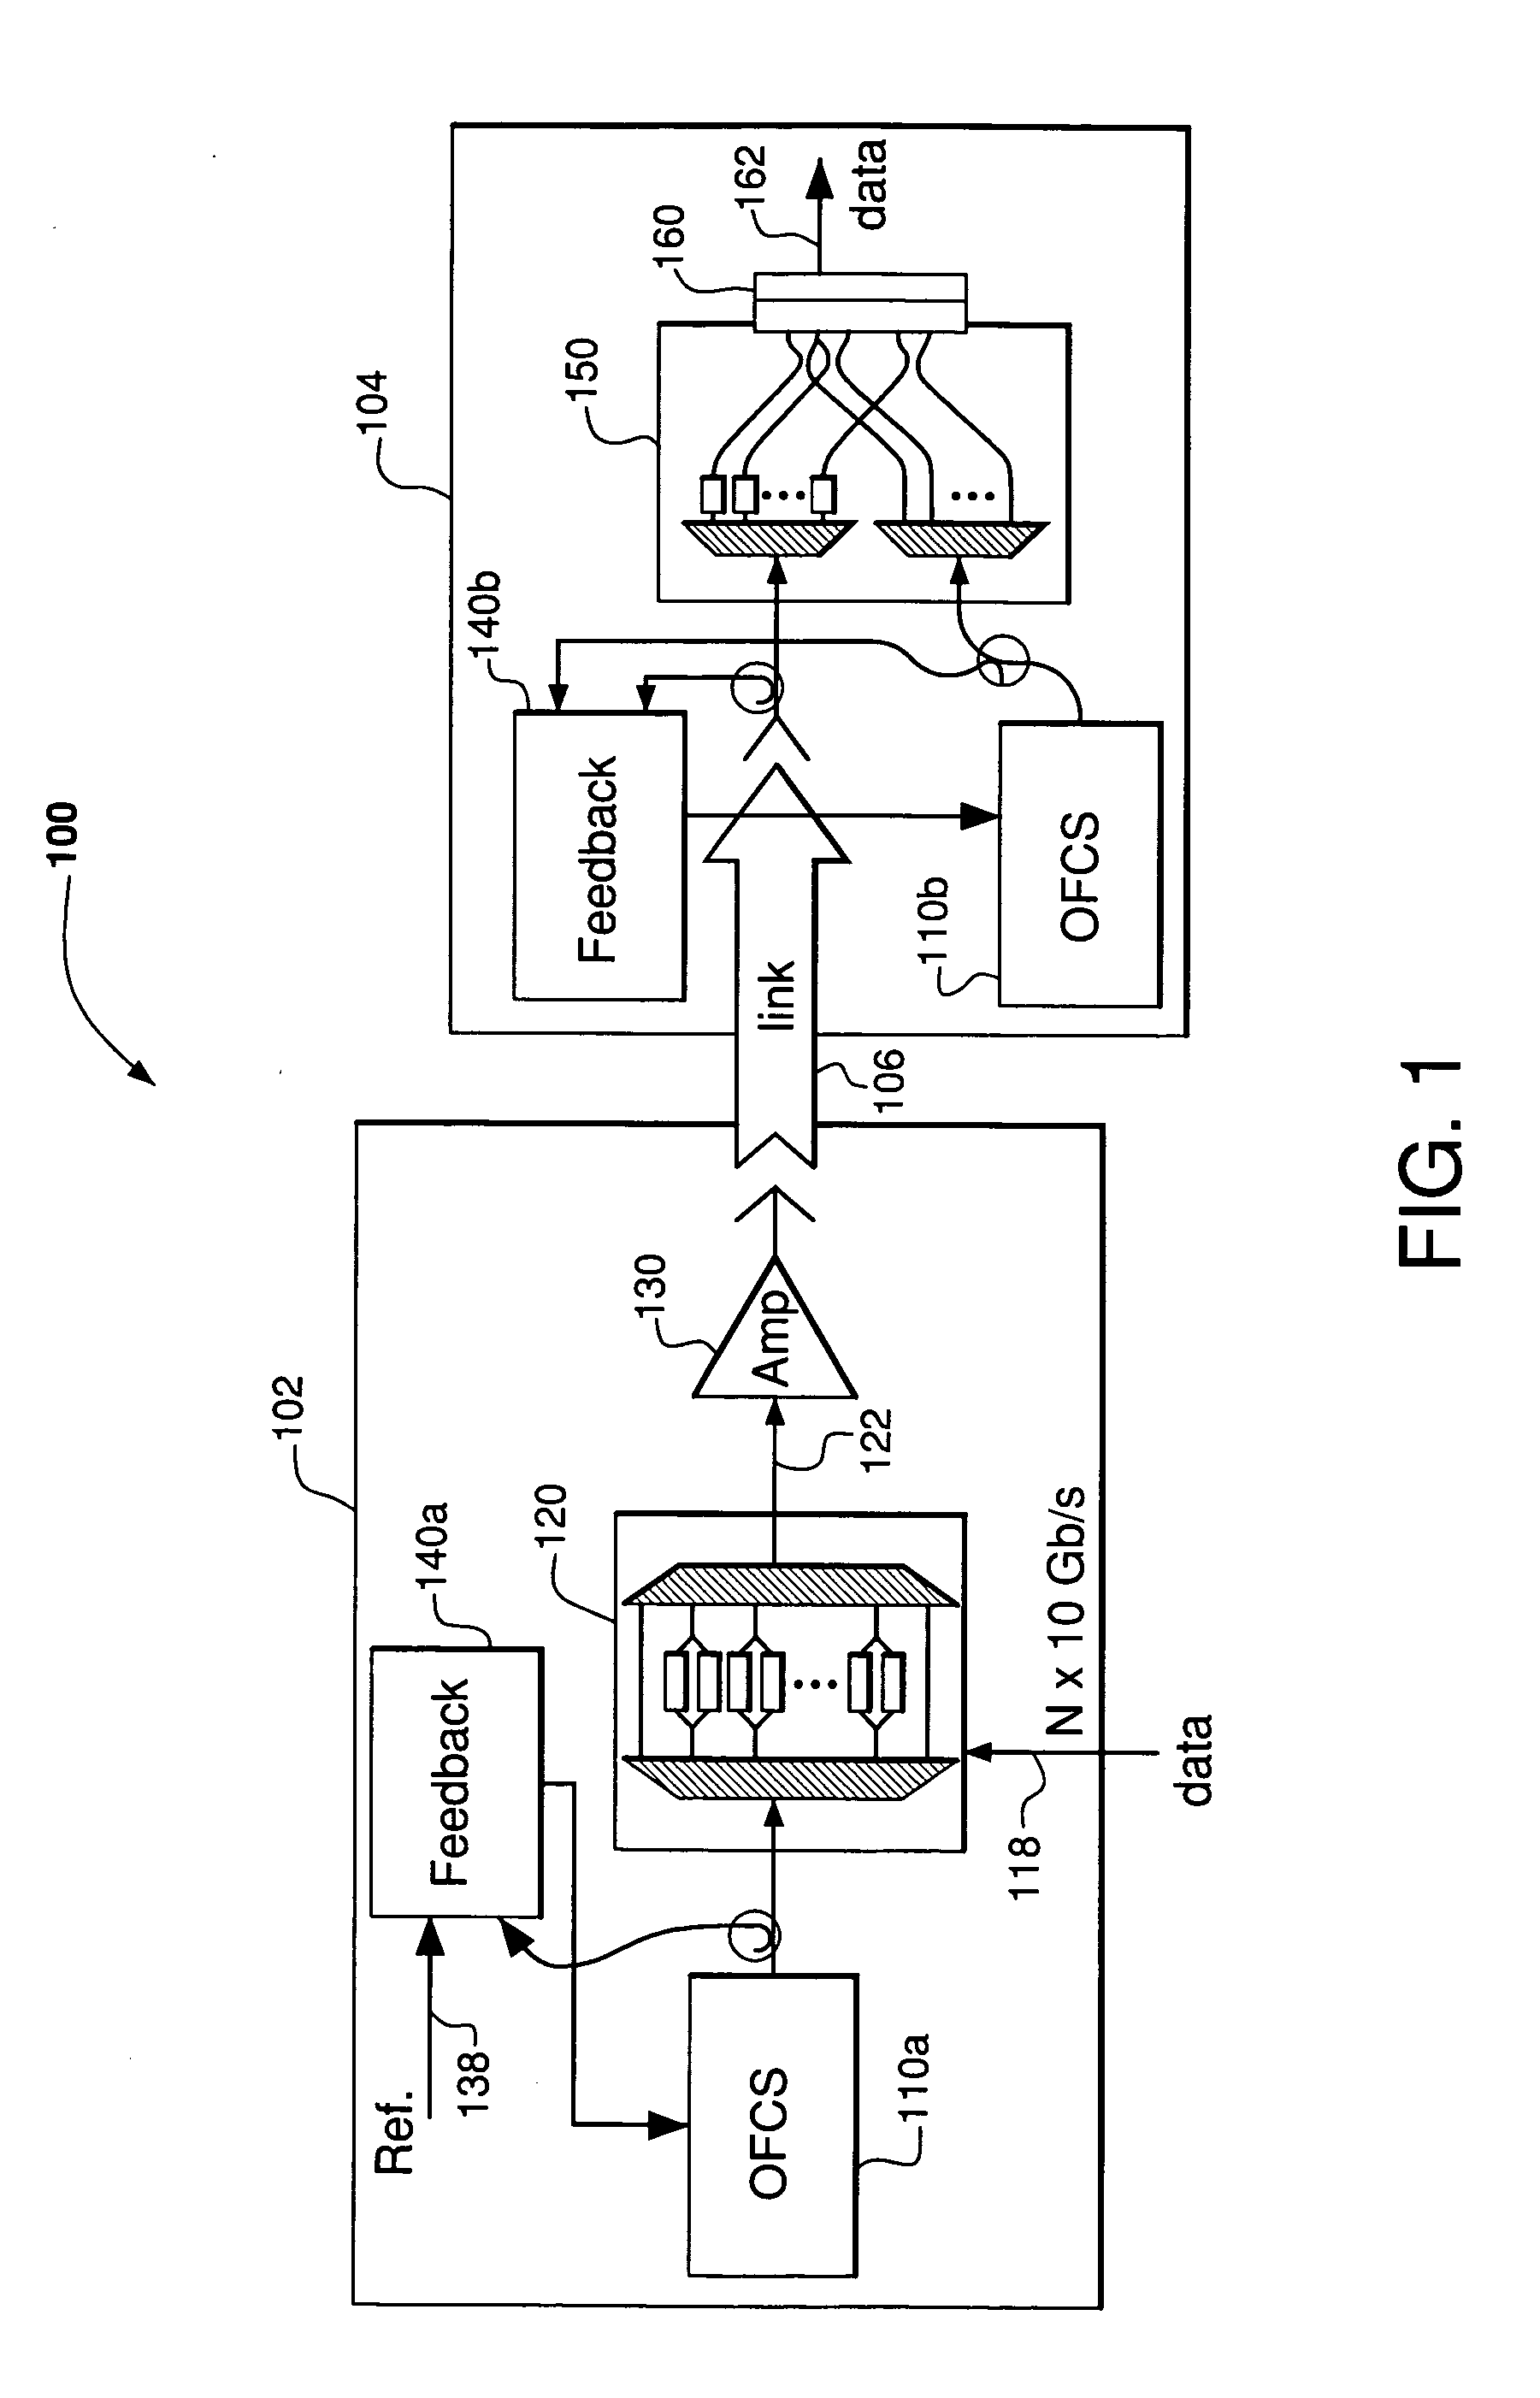 Use of beacons in a WDM communication system